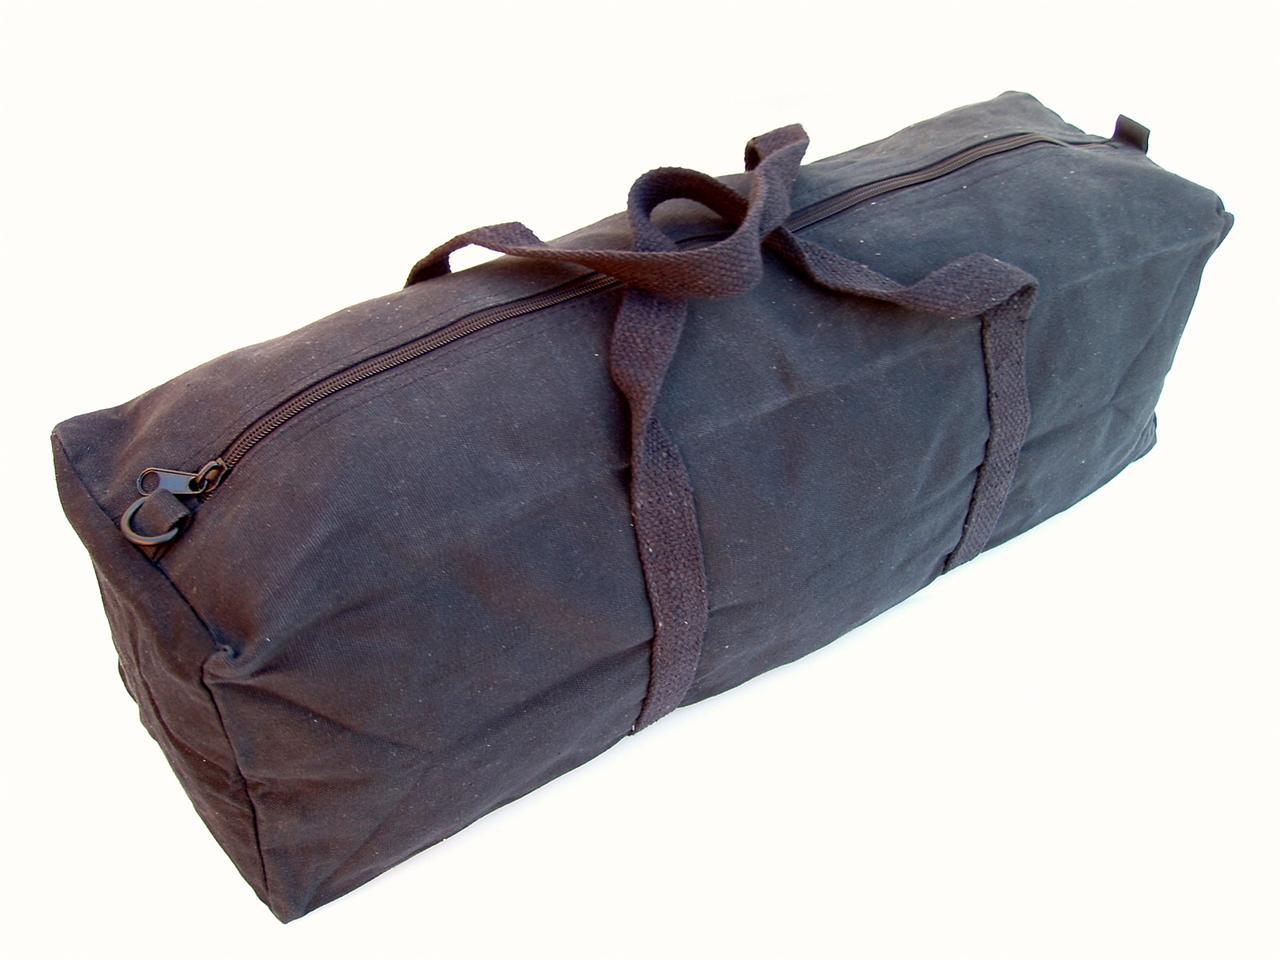 New Heavy Duty Canvas Tool Carry Bag Travel Luggage Duffel Duffle Tote Zip 3Size | eBay